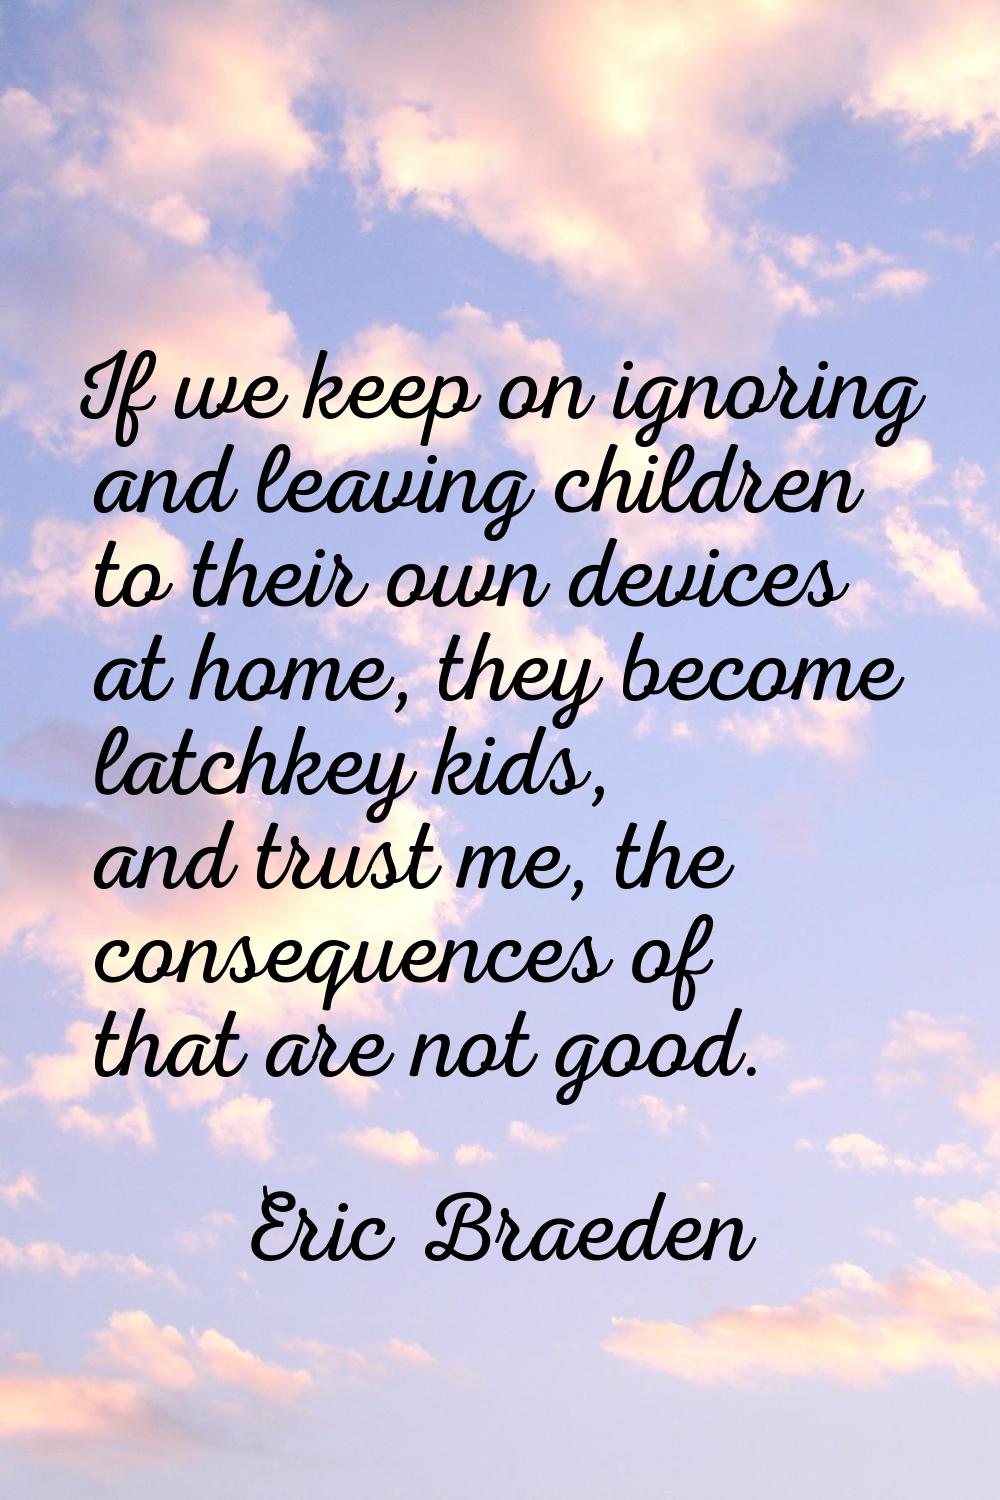 If we keep on ignoring and leaving children to their own devices at home, they become latchkey kids